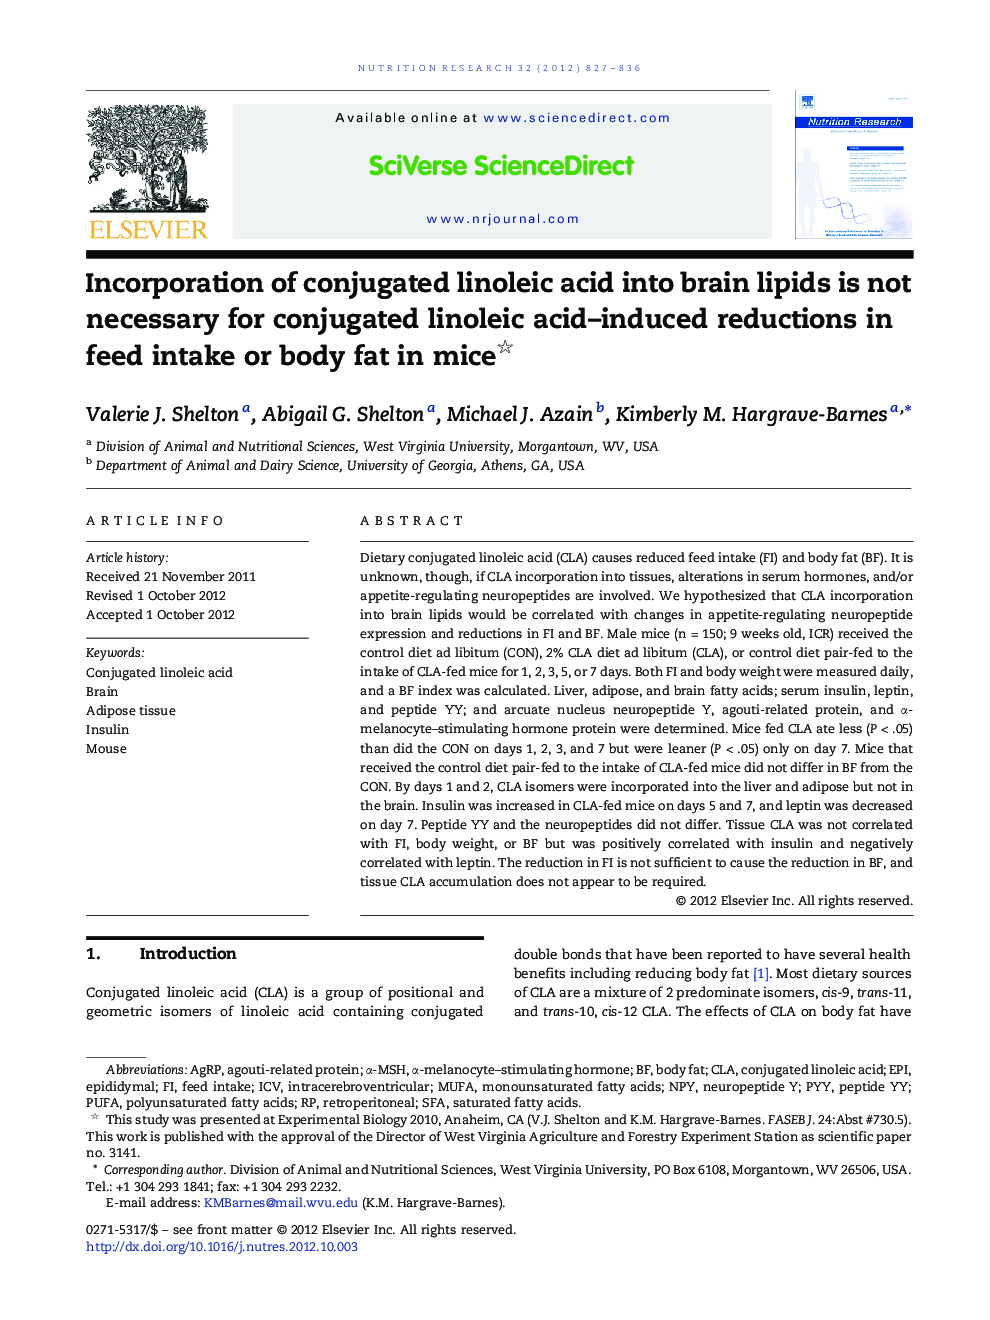 Incorporation of conjugated linoleic acid into brain lipids is not necessary for conjugated linoleic acid-induced reductions in feed intake or body fat in mice